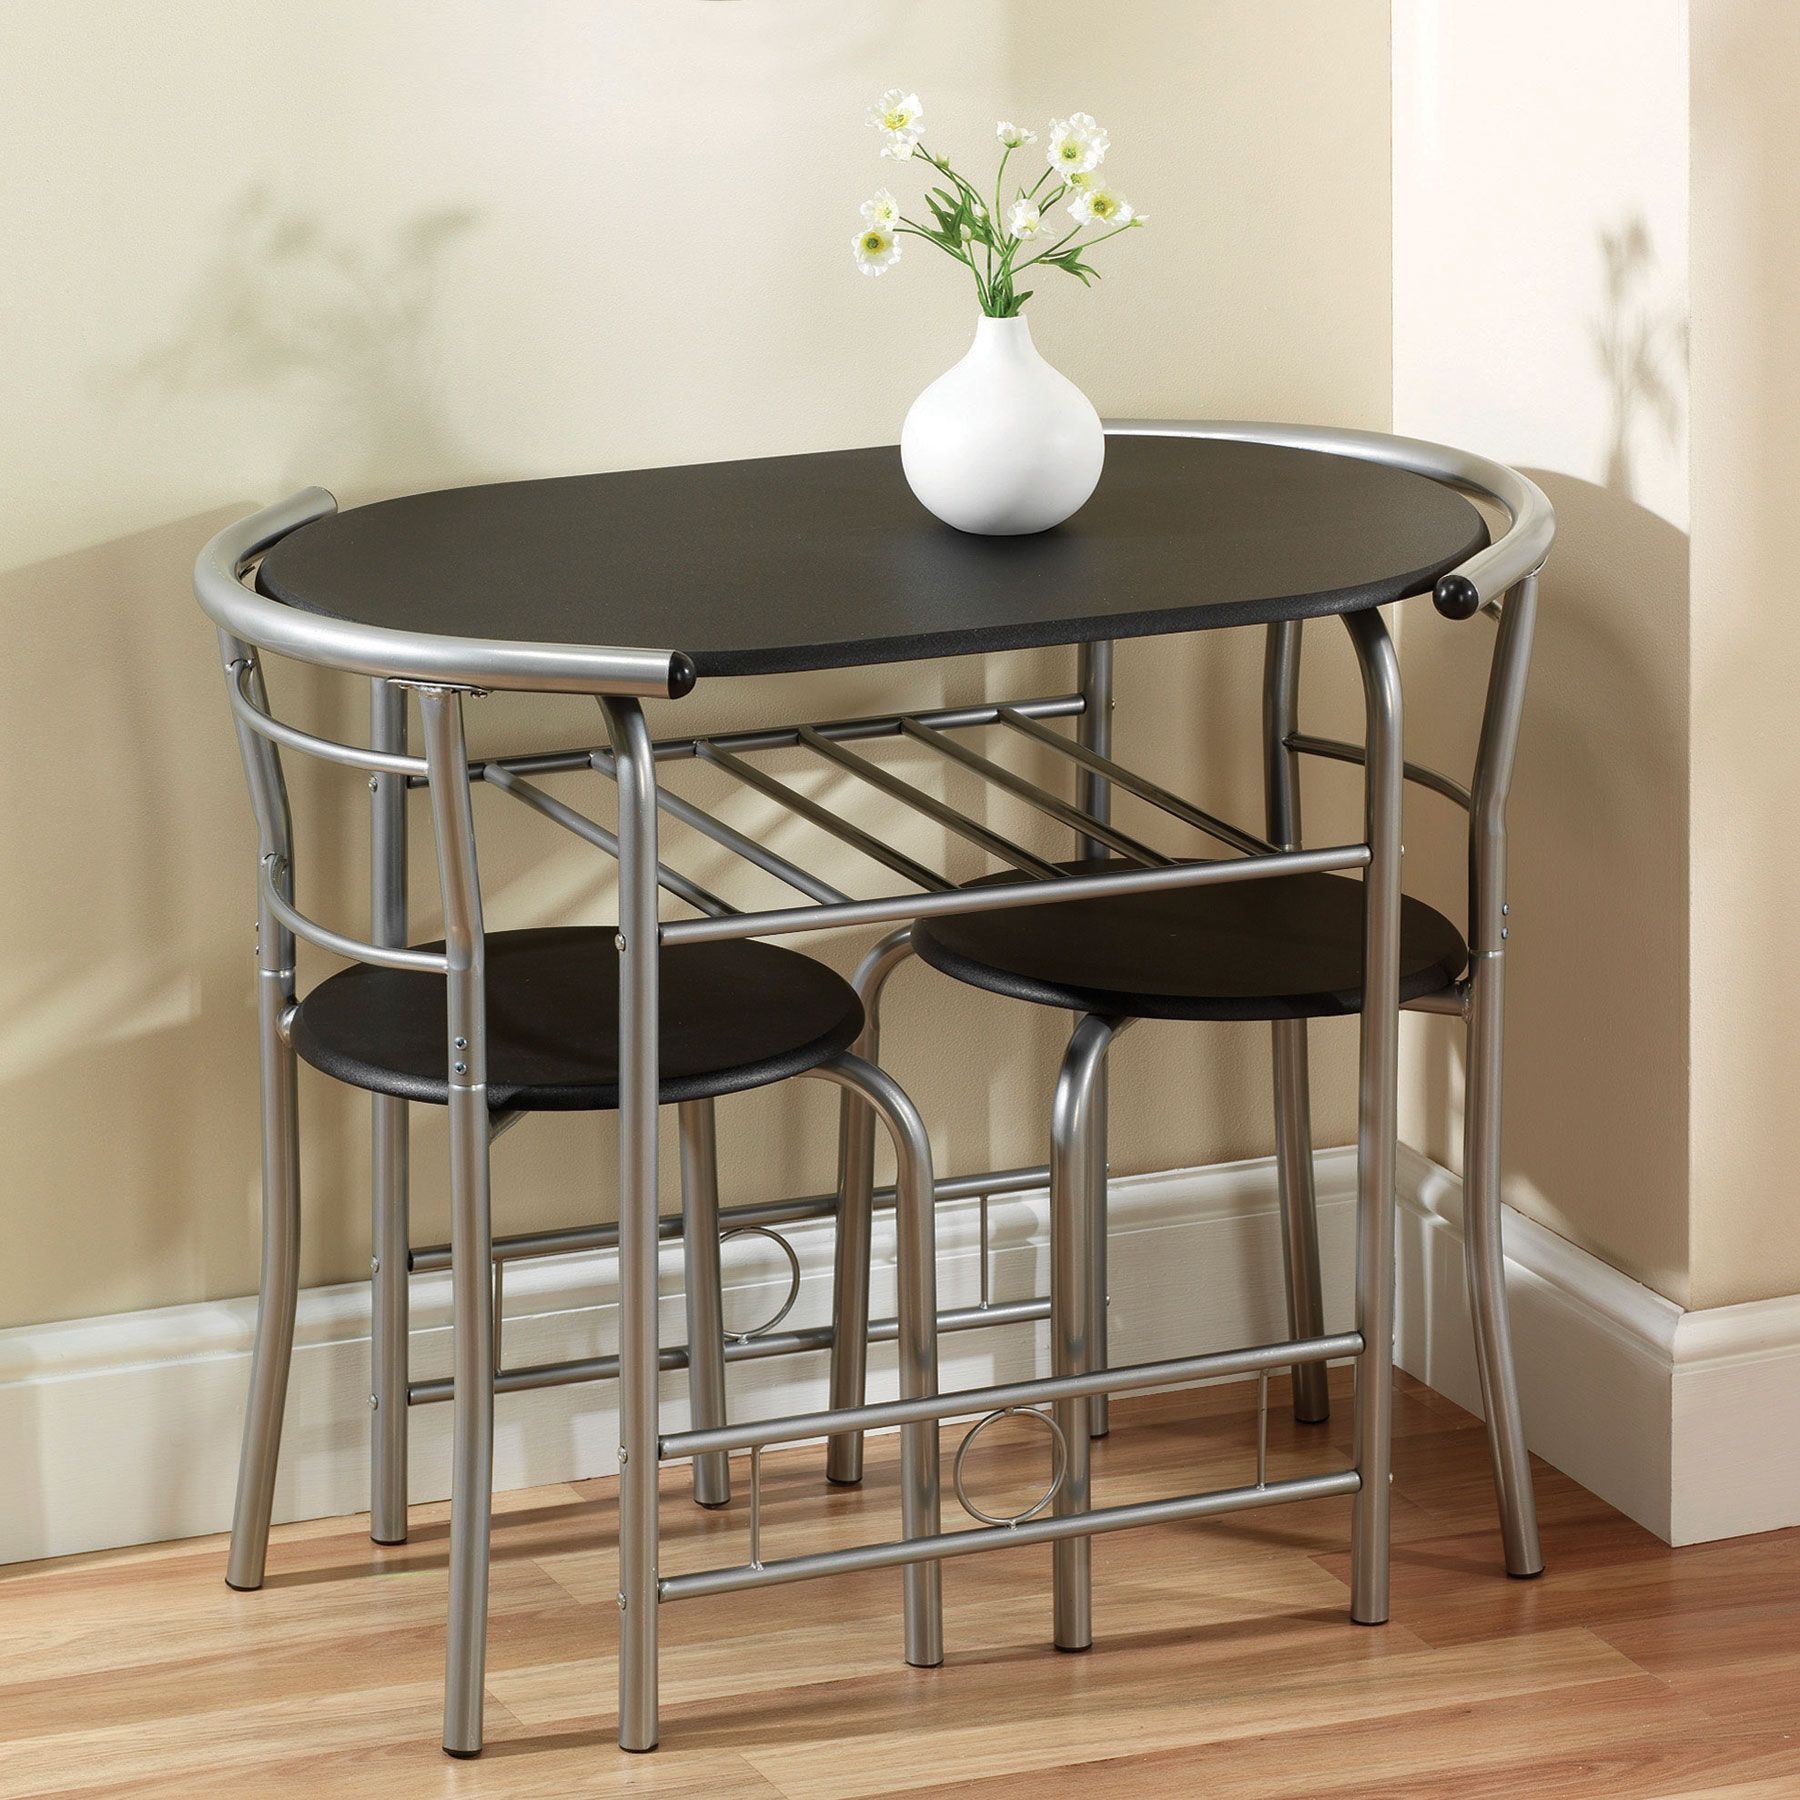 Space Saving Dining Table Compact, Is Round Table Good For Small Spaces